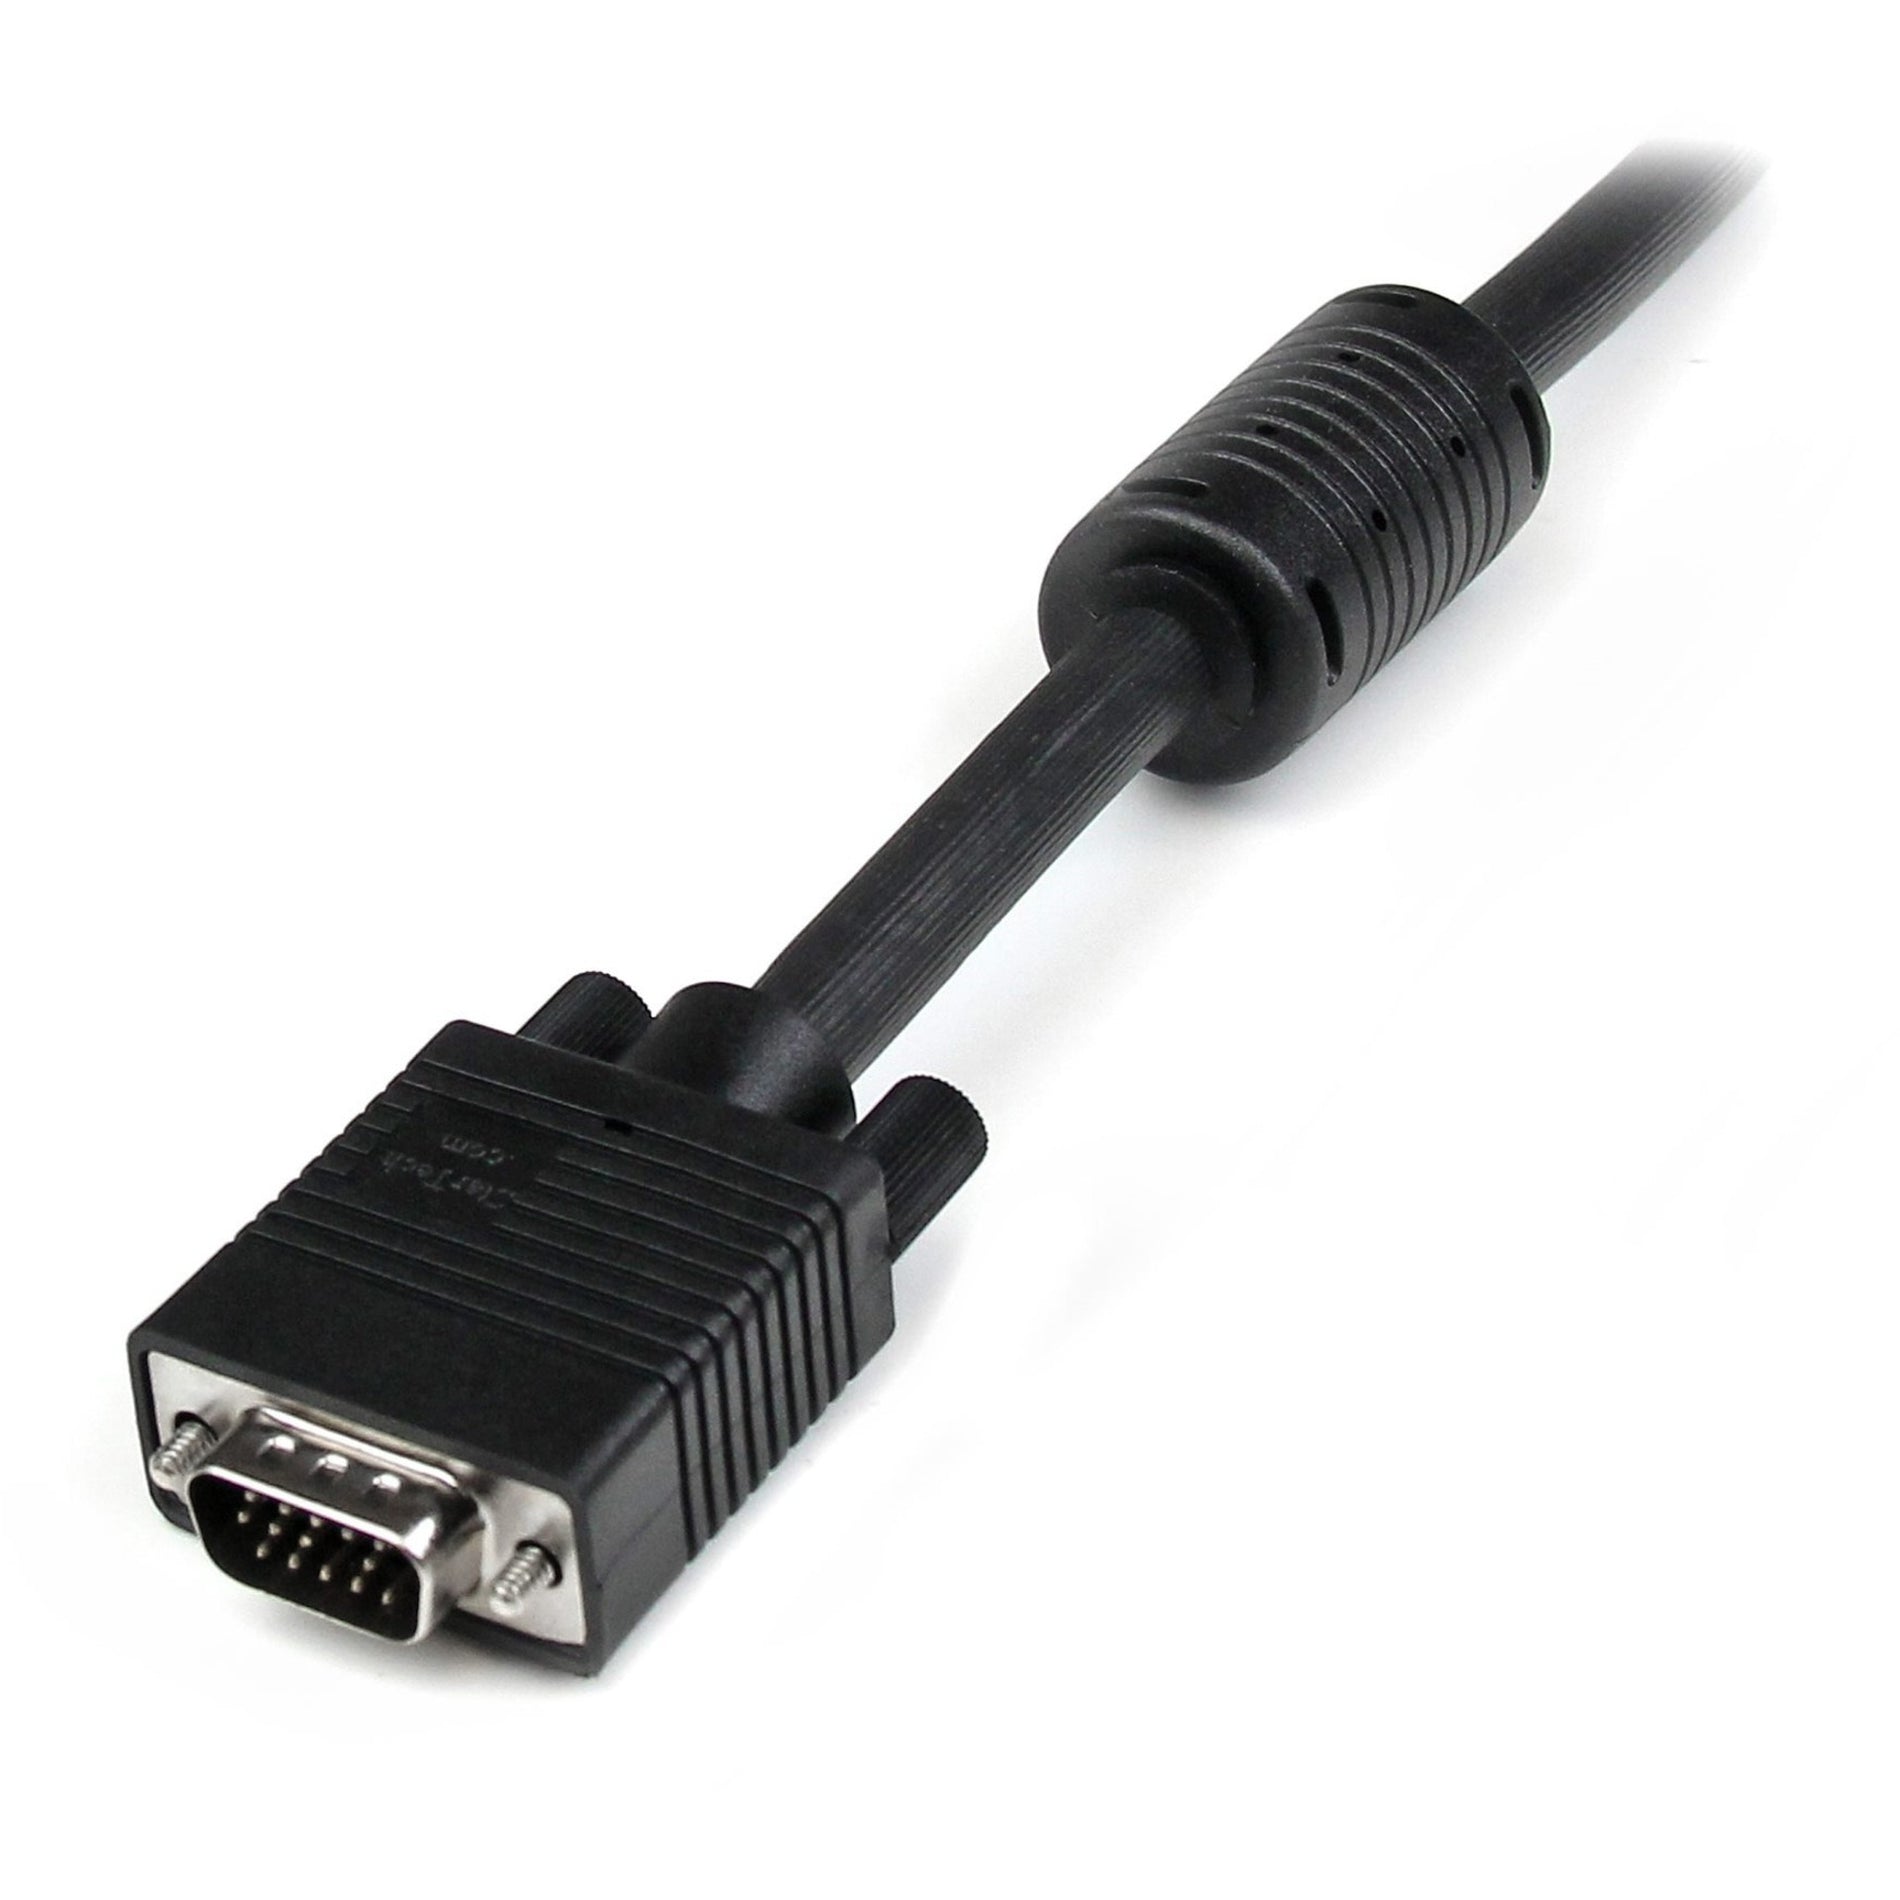 StarTech.com MXT101MMHQ55 55 ft Coax High Resolution VGA Monitor Cable - HD15 M/M, Lifetime Warranty, CMG Rated